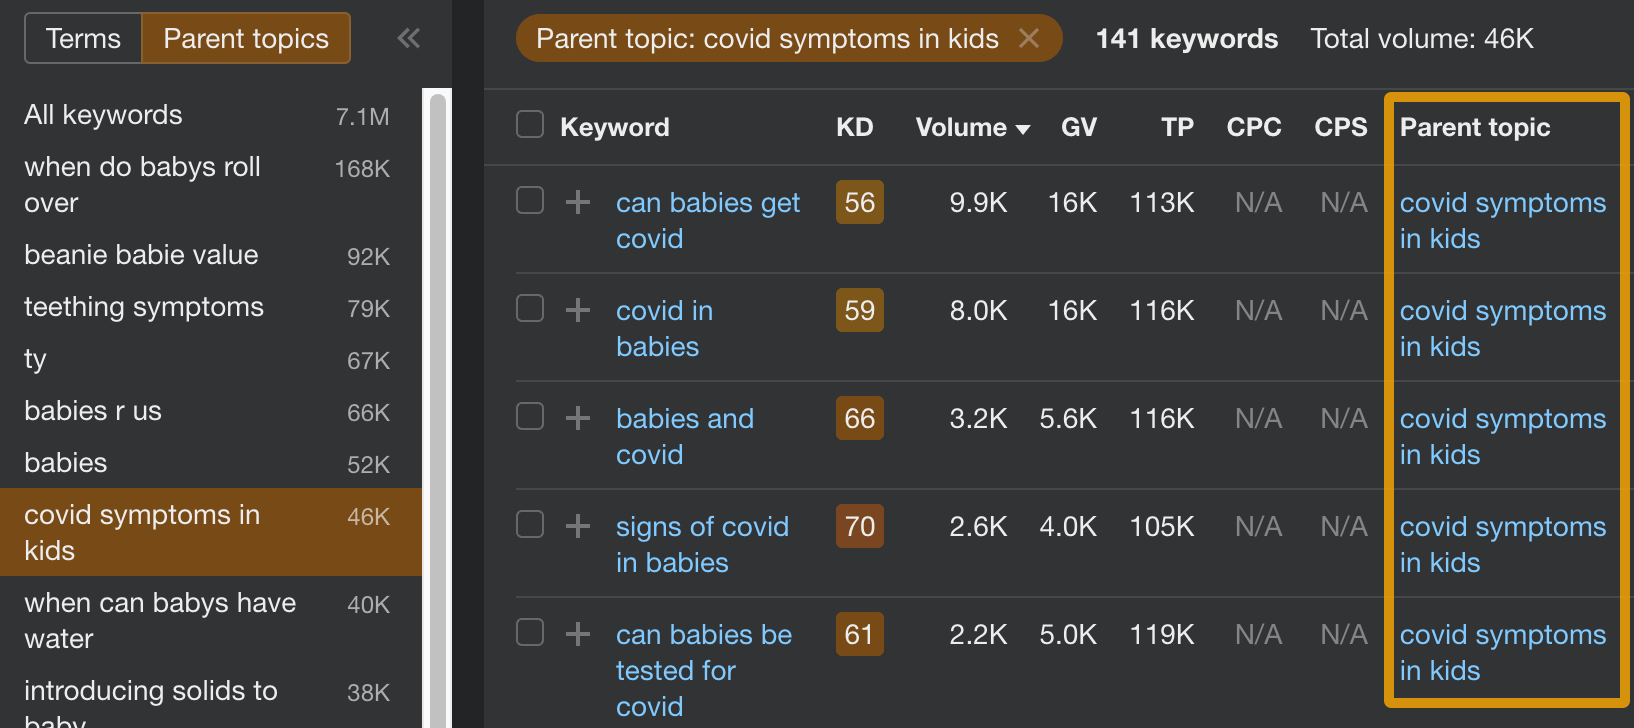 Keywords grouped under the same main topic